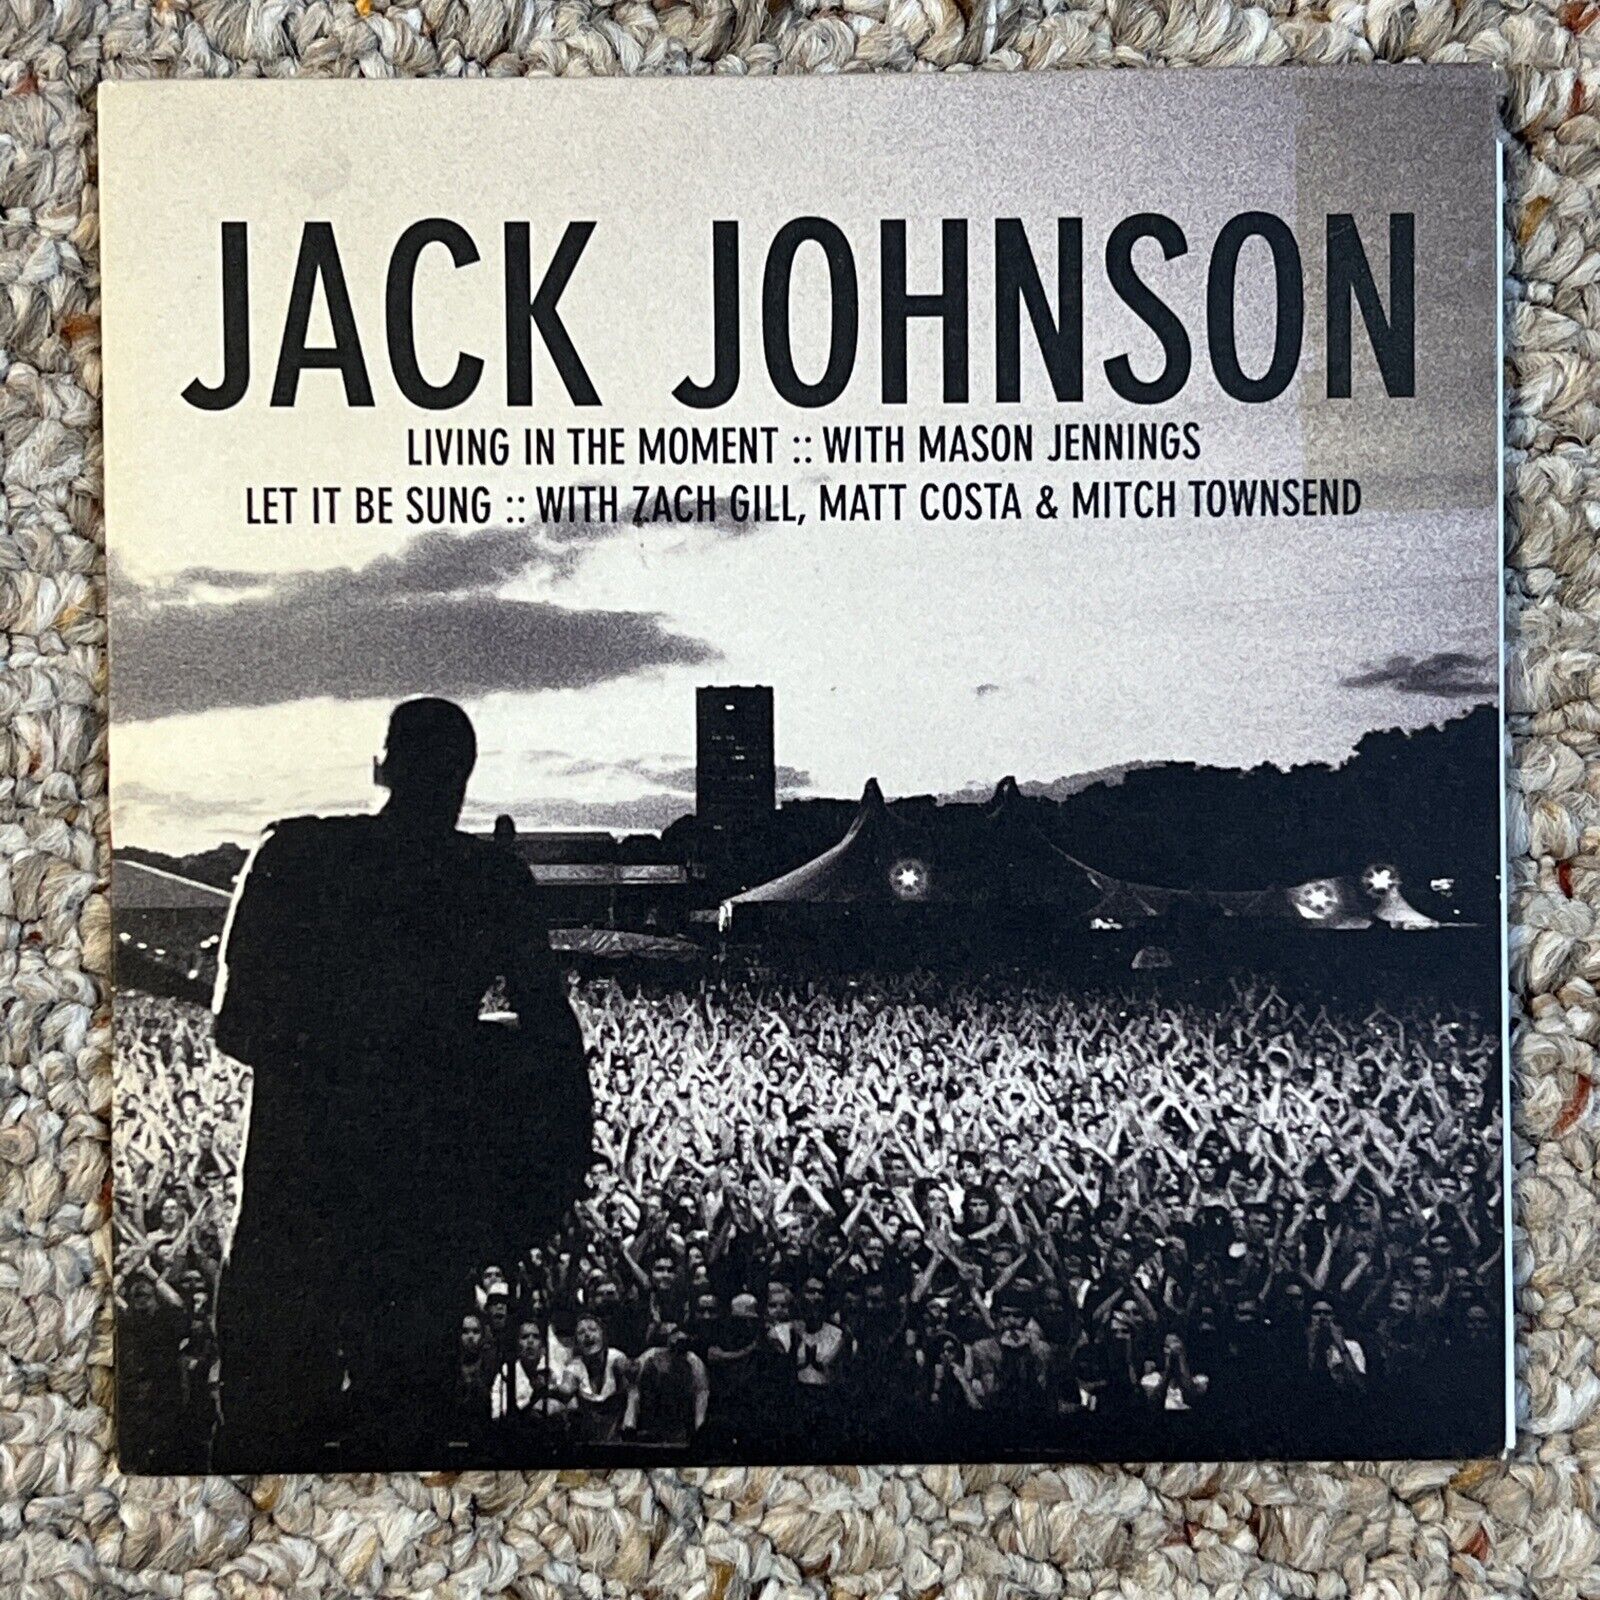 Jack Johnson 7” Single Vinyl Living In The Moment Let It Be Sung